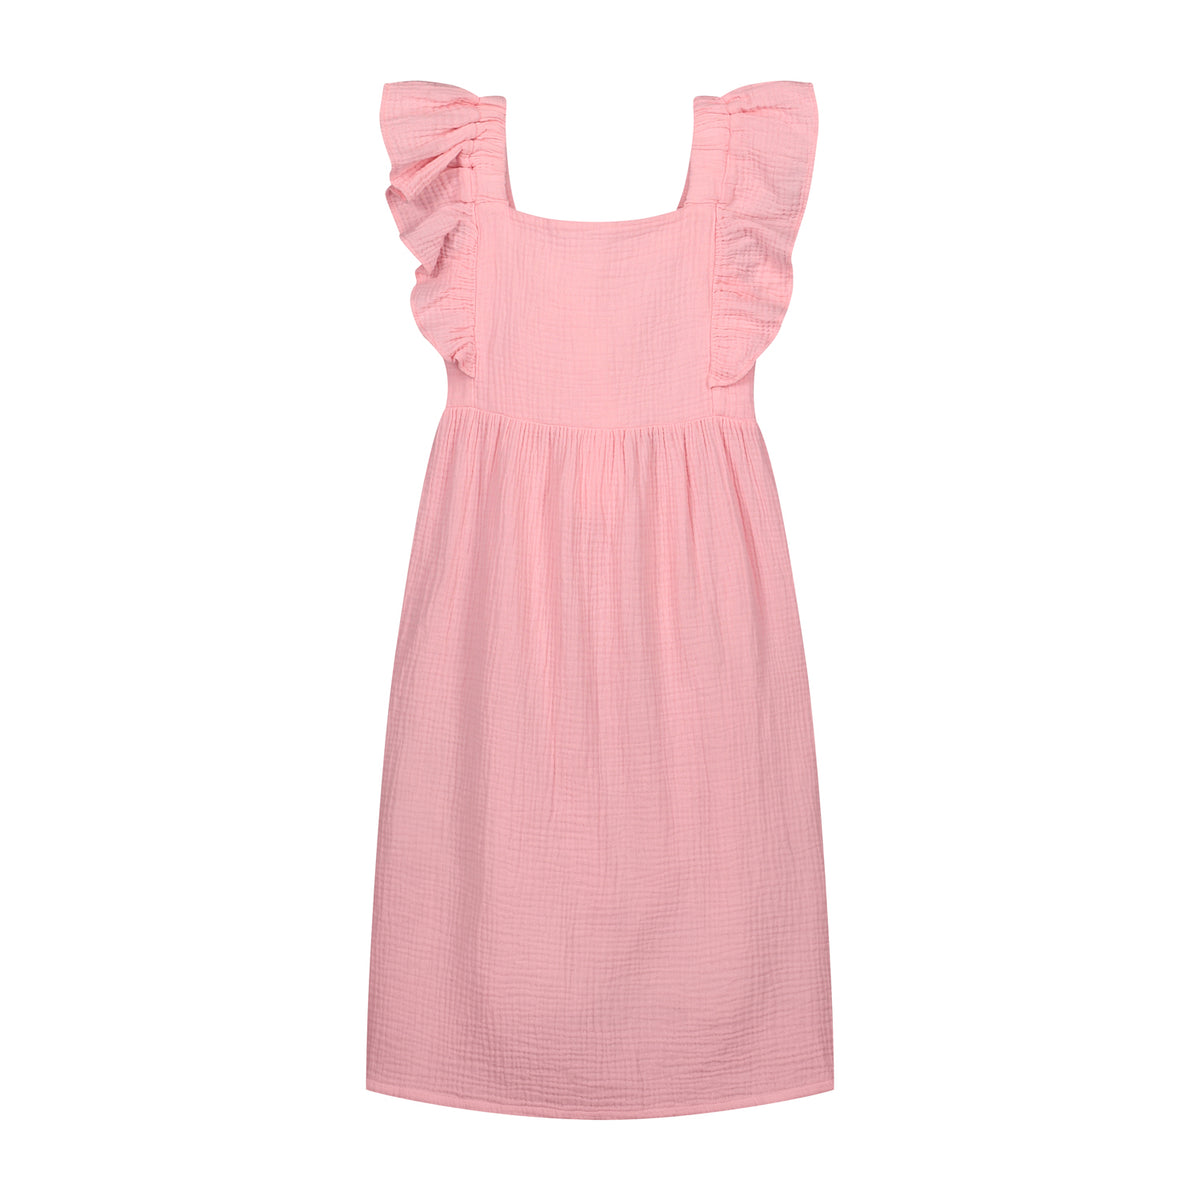 Bowie dress pinkle pink, Daily Brat